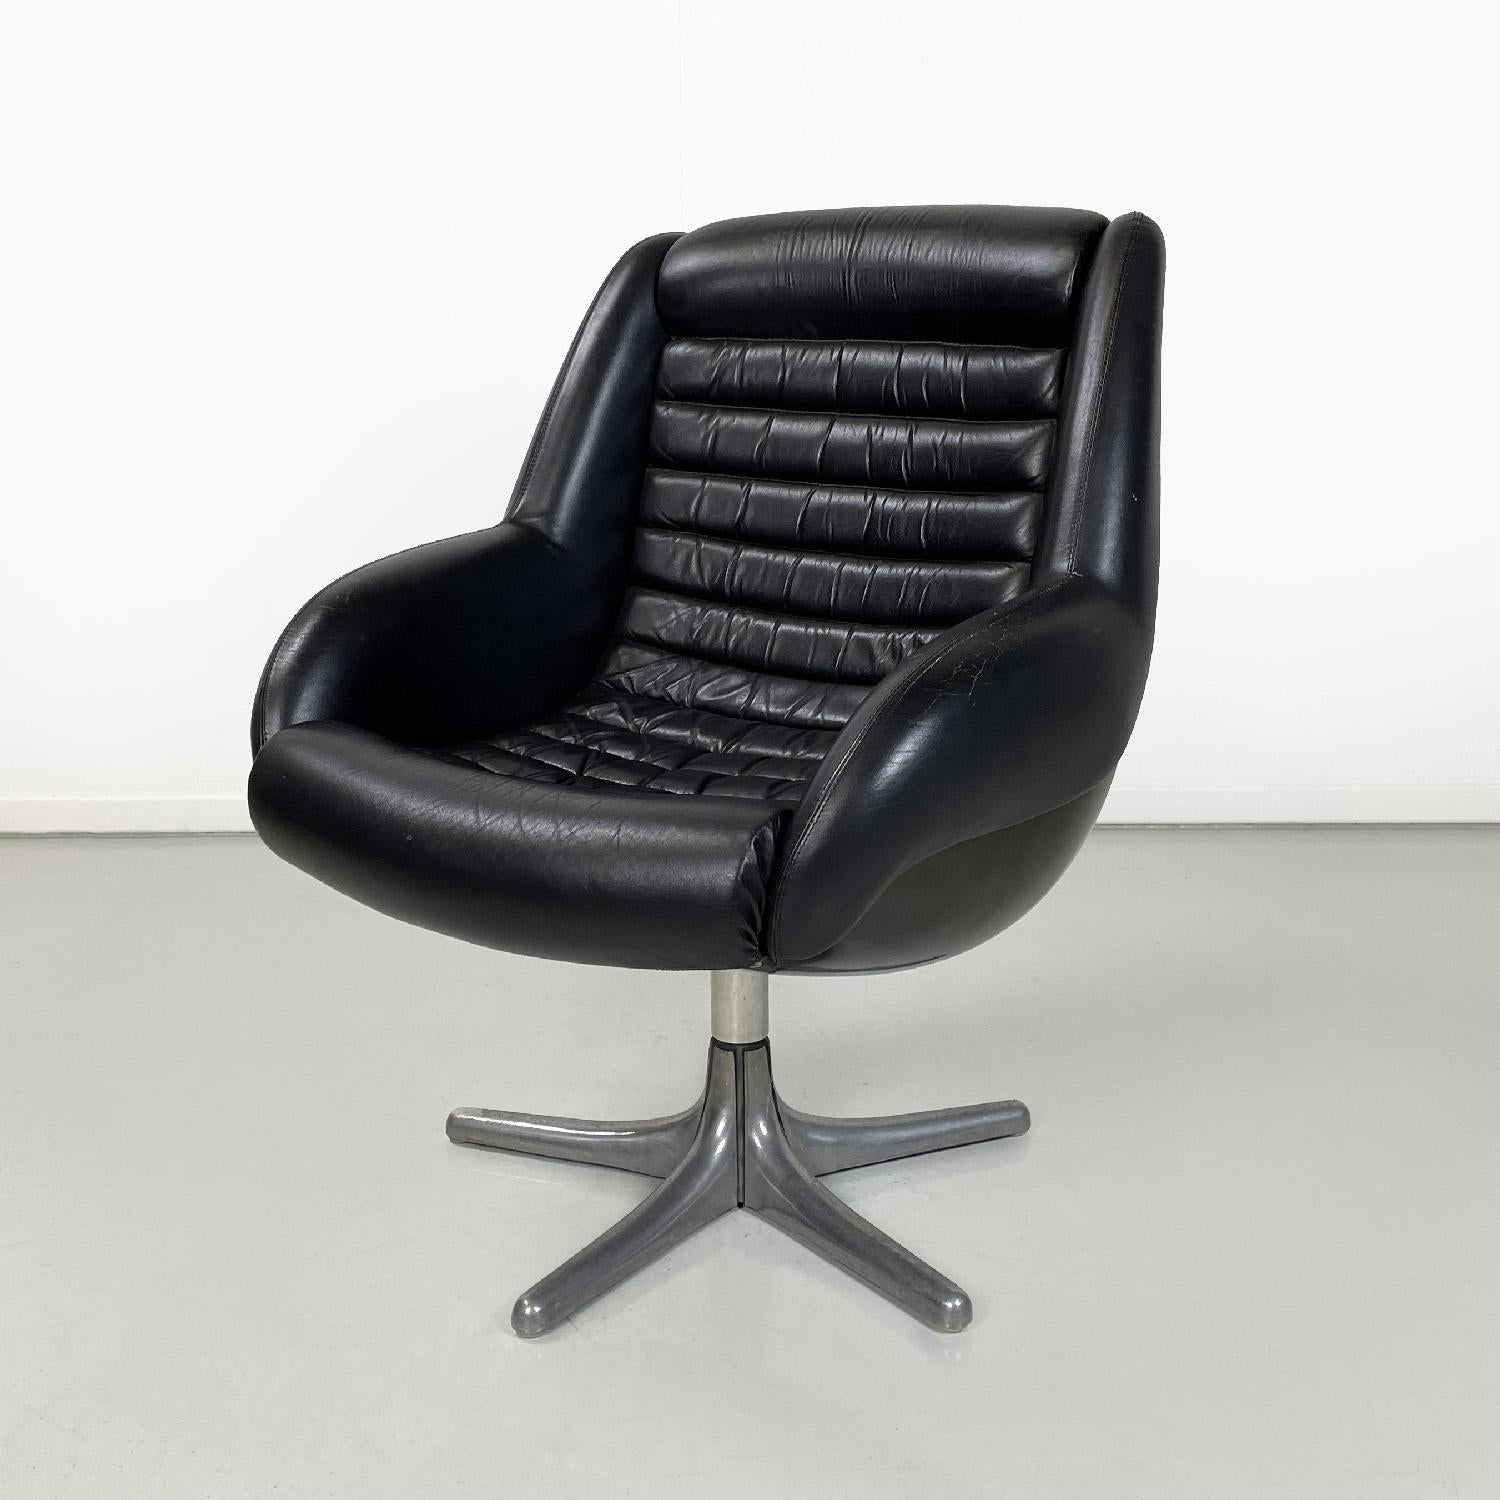 Italian mid-century modern black leather armchair Cesare Casati for Arflex 1960s
Swivel armchair in black leather. The seat and backrest are composed of a single curved and welcoming structure with horizontal stitching. The armrests and headrest are